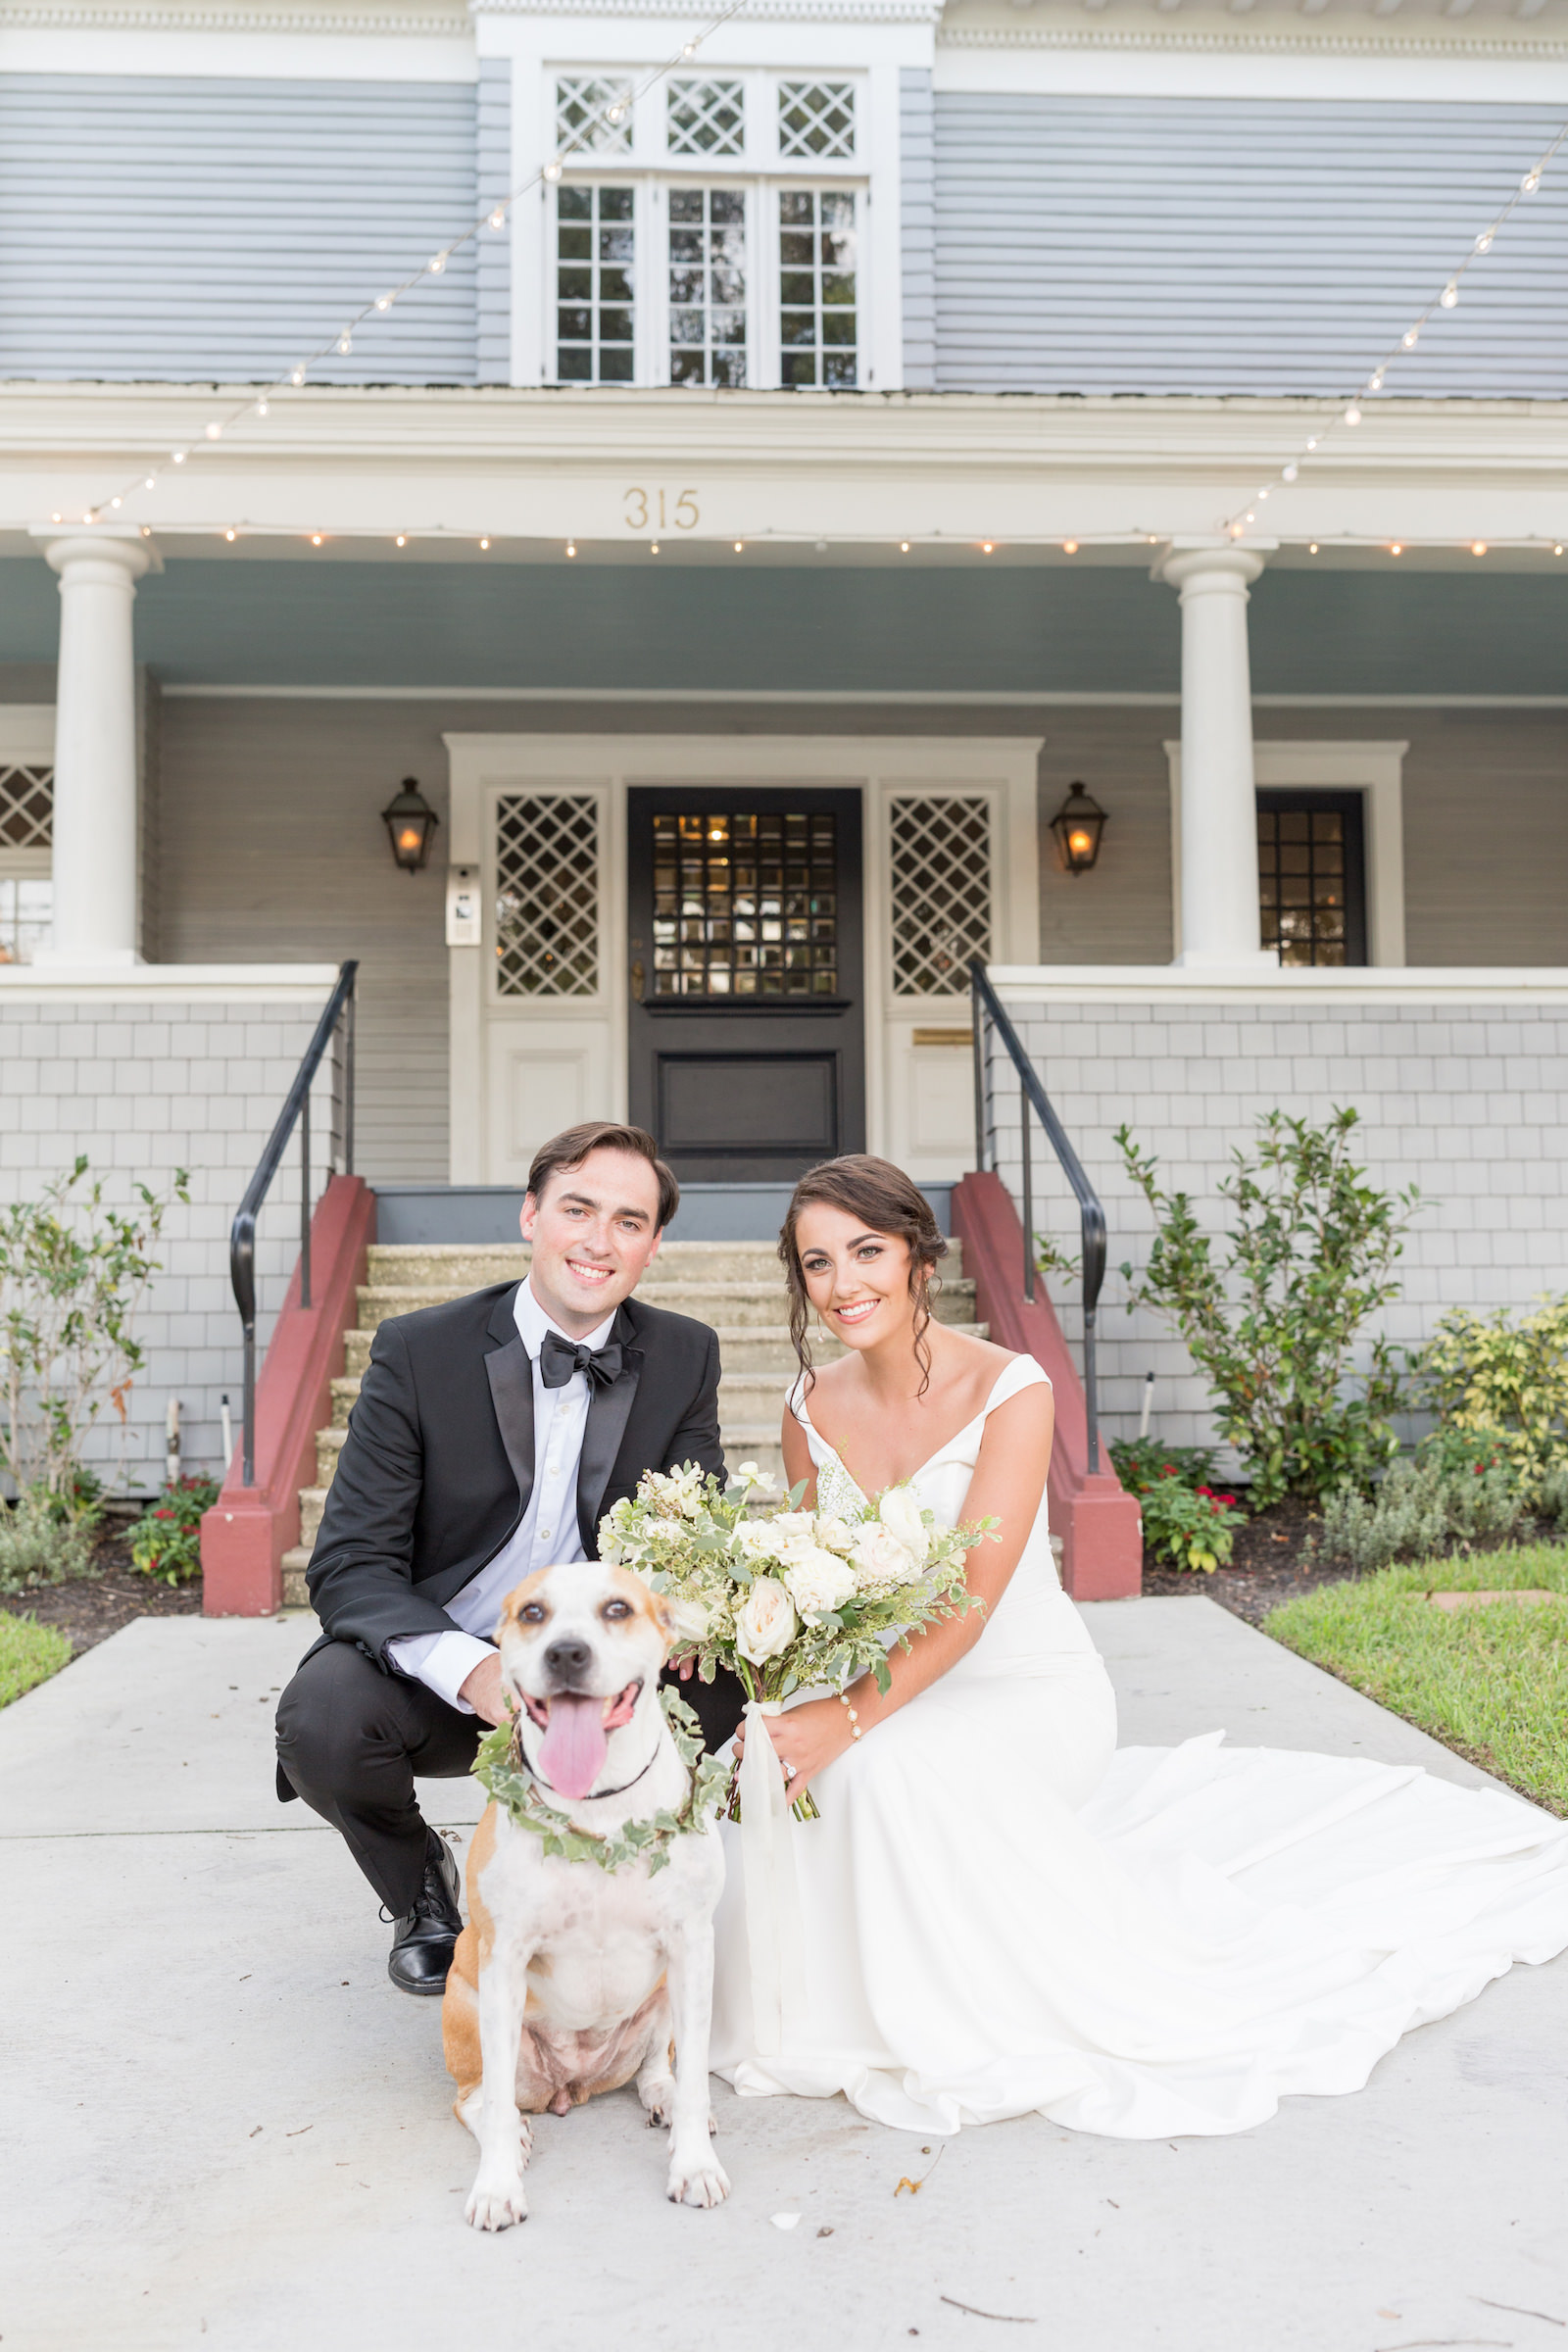 Classic and timeless bride and groom outside with dog, historic Tampa wedding venue The Orlo | Wedding pet planner FairyTail Pet Care